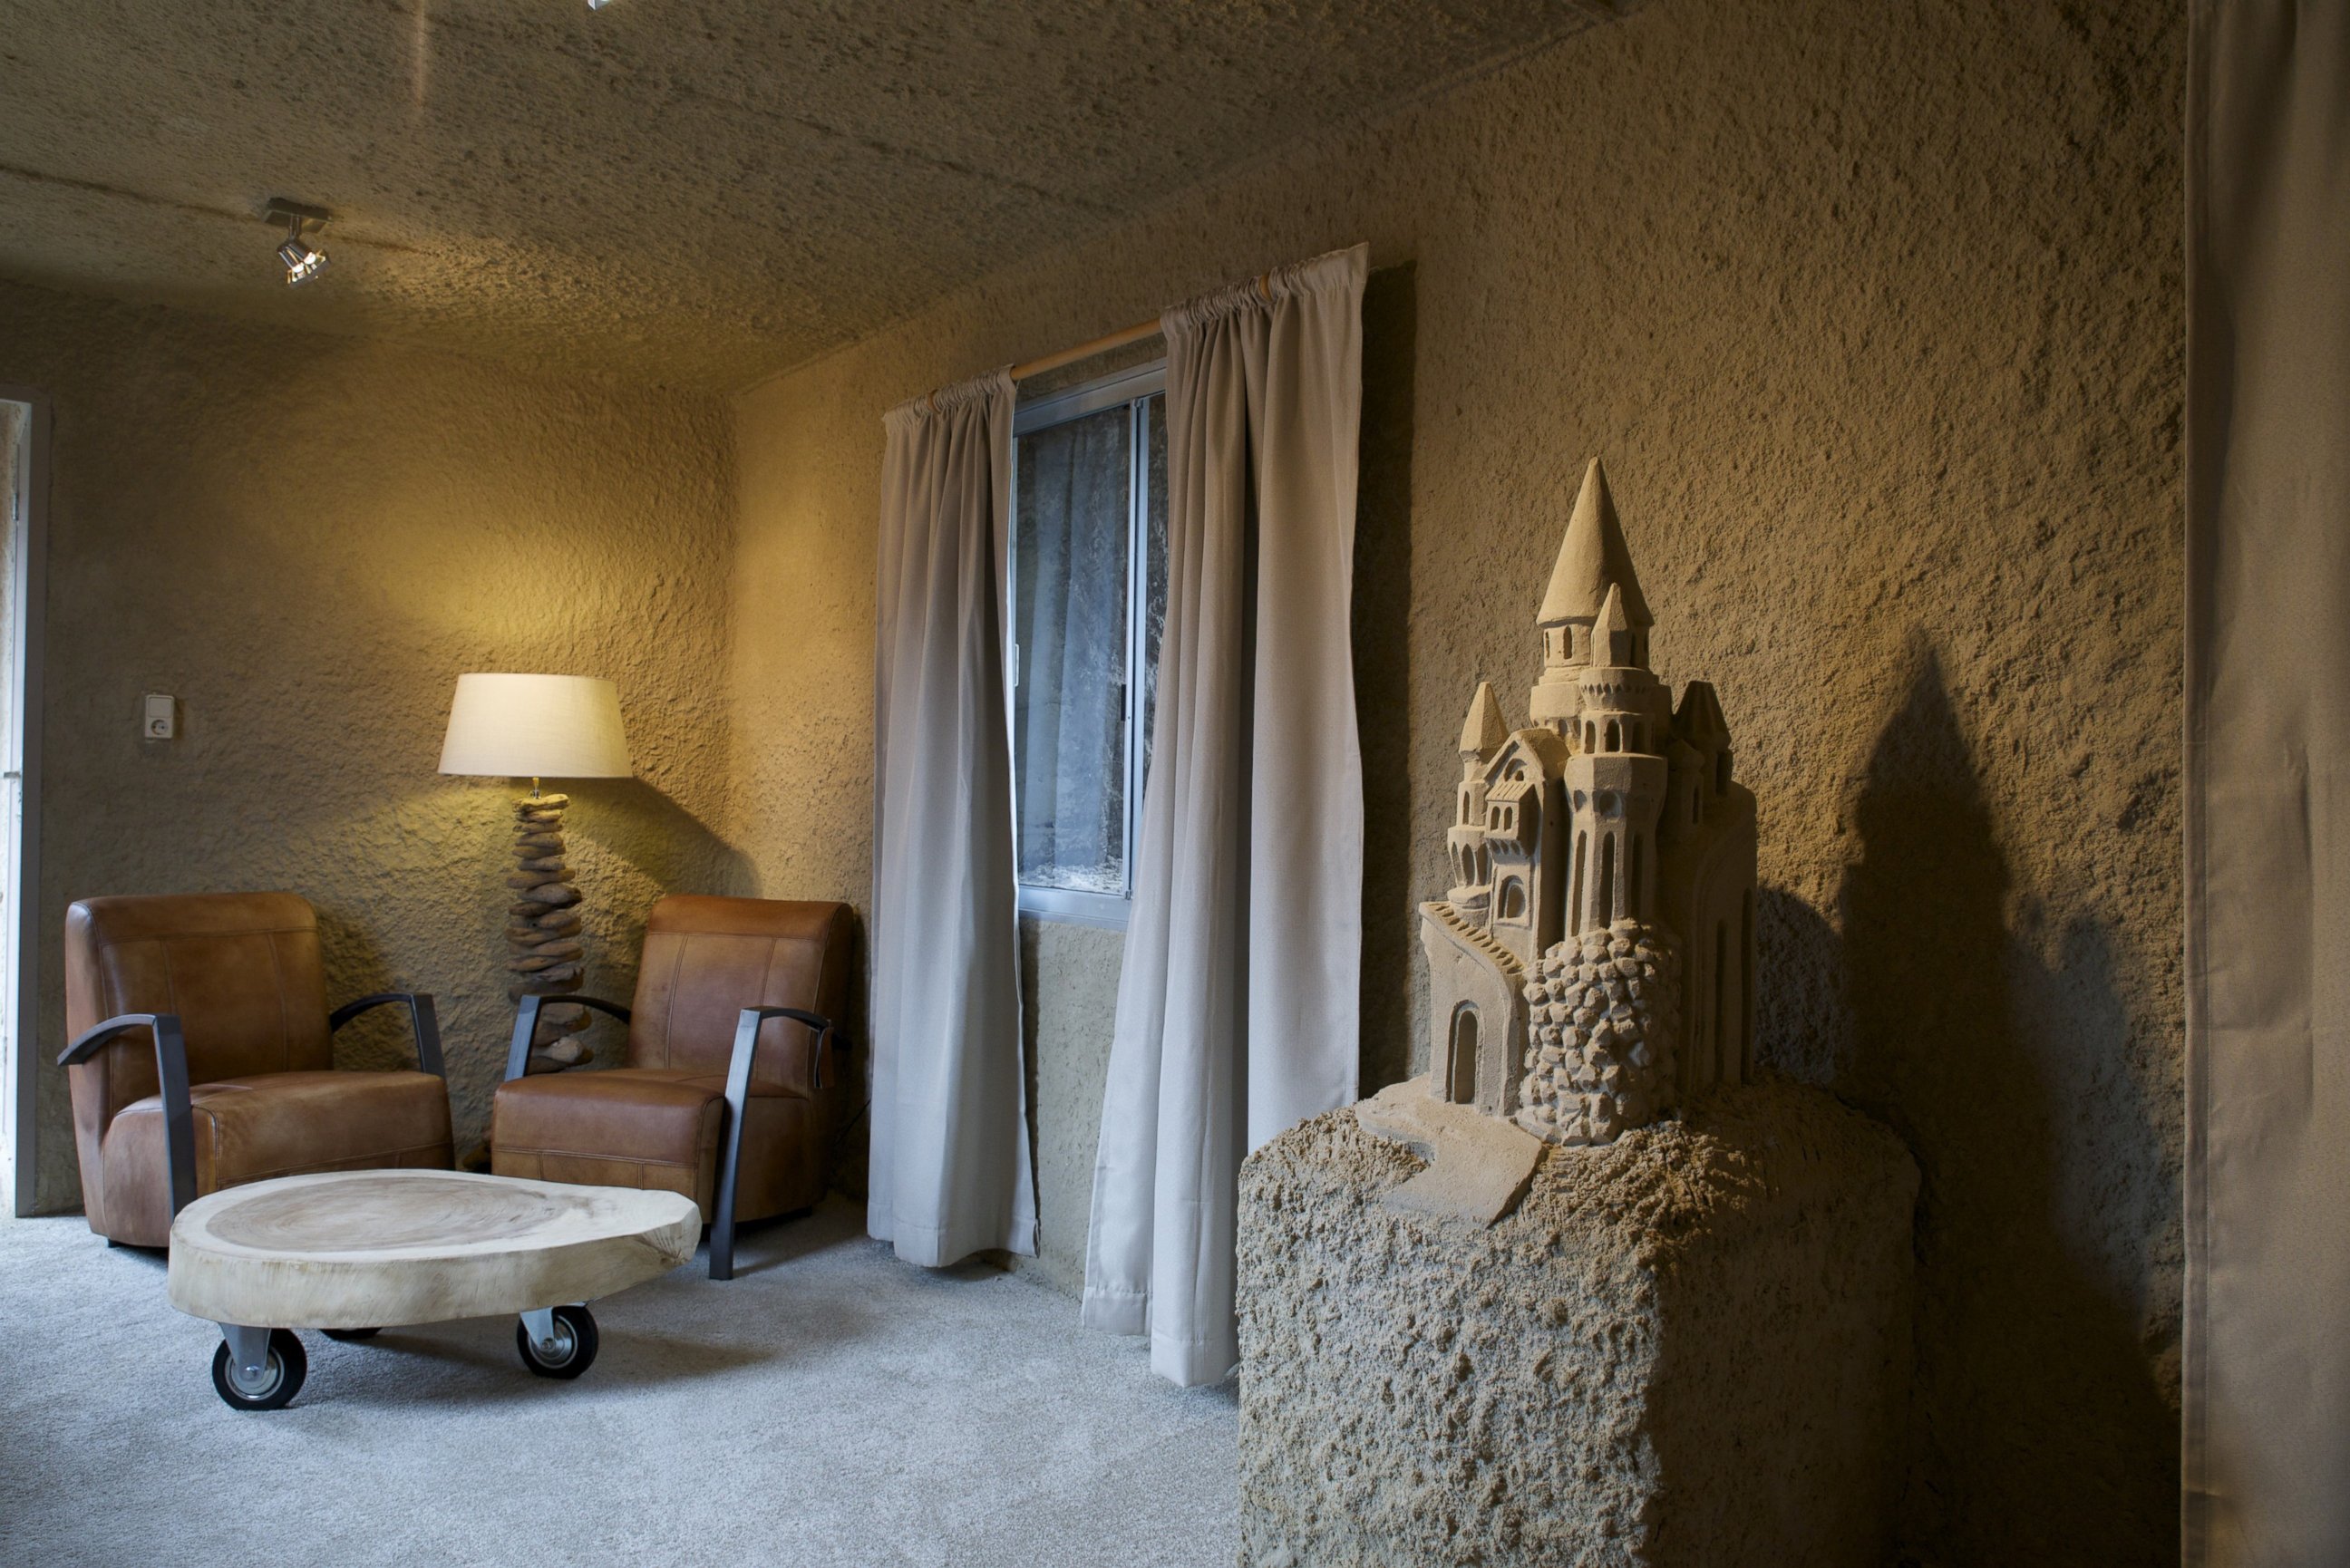 PHOTO:The Zand Hotel in the Dutch cities of Sneek and Oss is the first sand hotel in the world.  